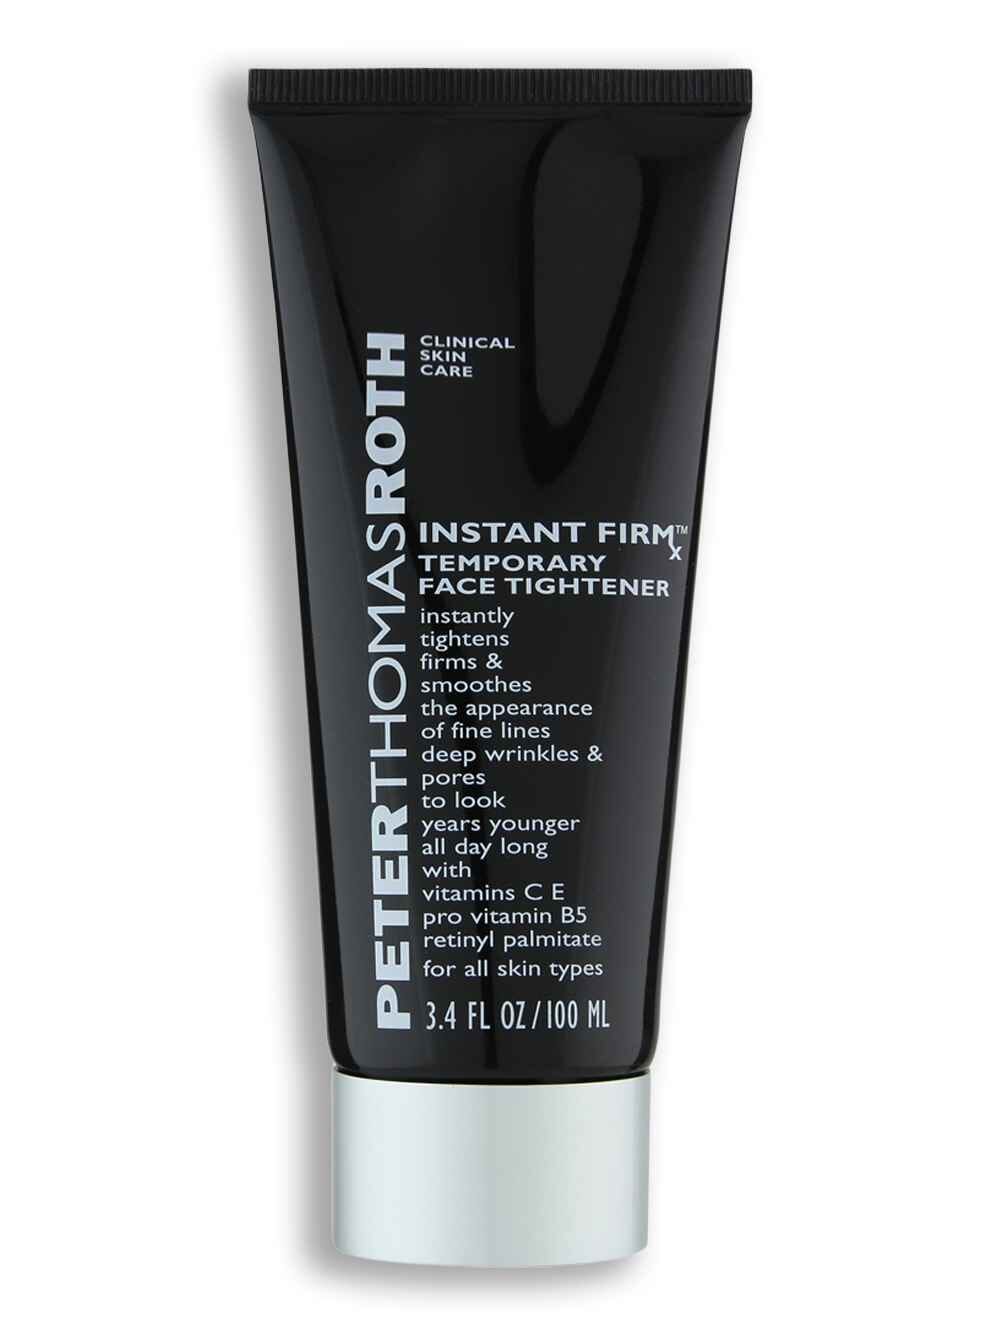 Peter Thomas Roth Peter Thomas Roth Instant Firmx Temporary Face Tightener 3.4 oz100 ml Skin Care Treatments 